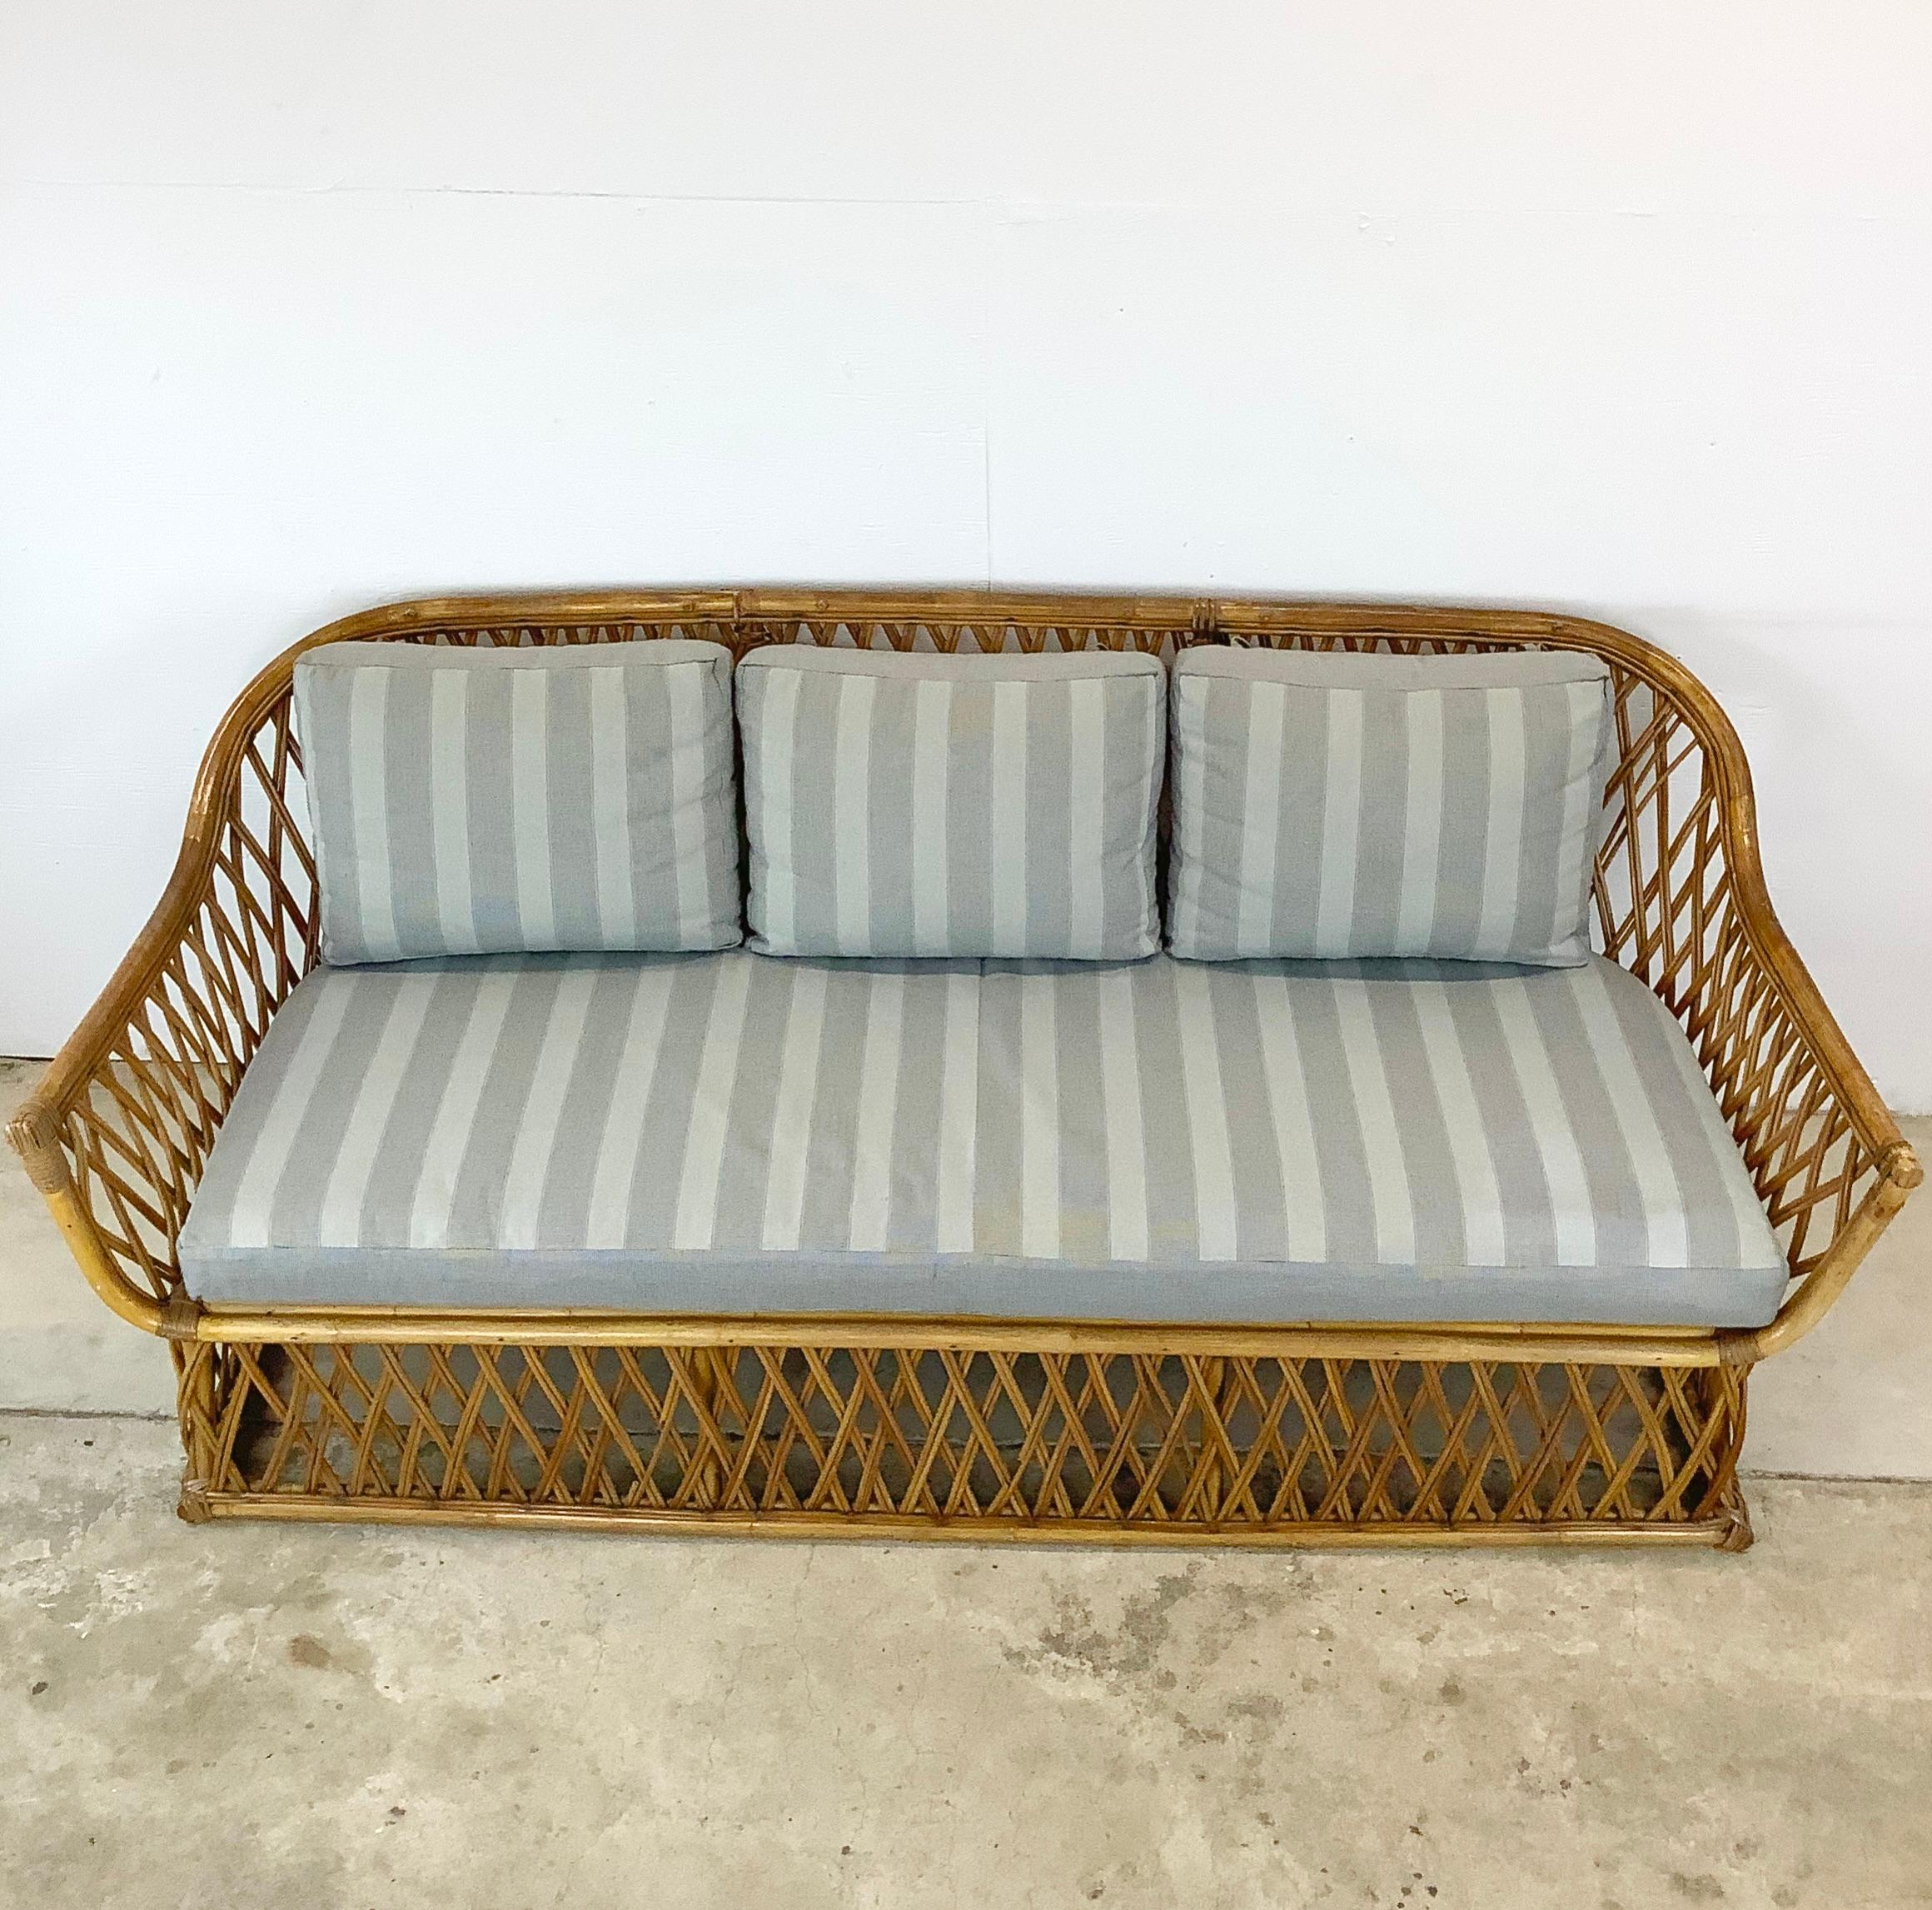 Are you in search of a sofa that marries vintage coastal style and timeless comfort? Look no further- this Vintage Split Reed Wicker Sofa embodies the perfect blend of vintage charm and lasting quality, making a boho chic seating solution that will